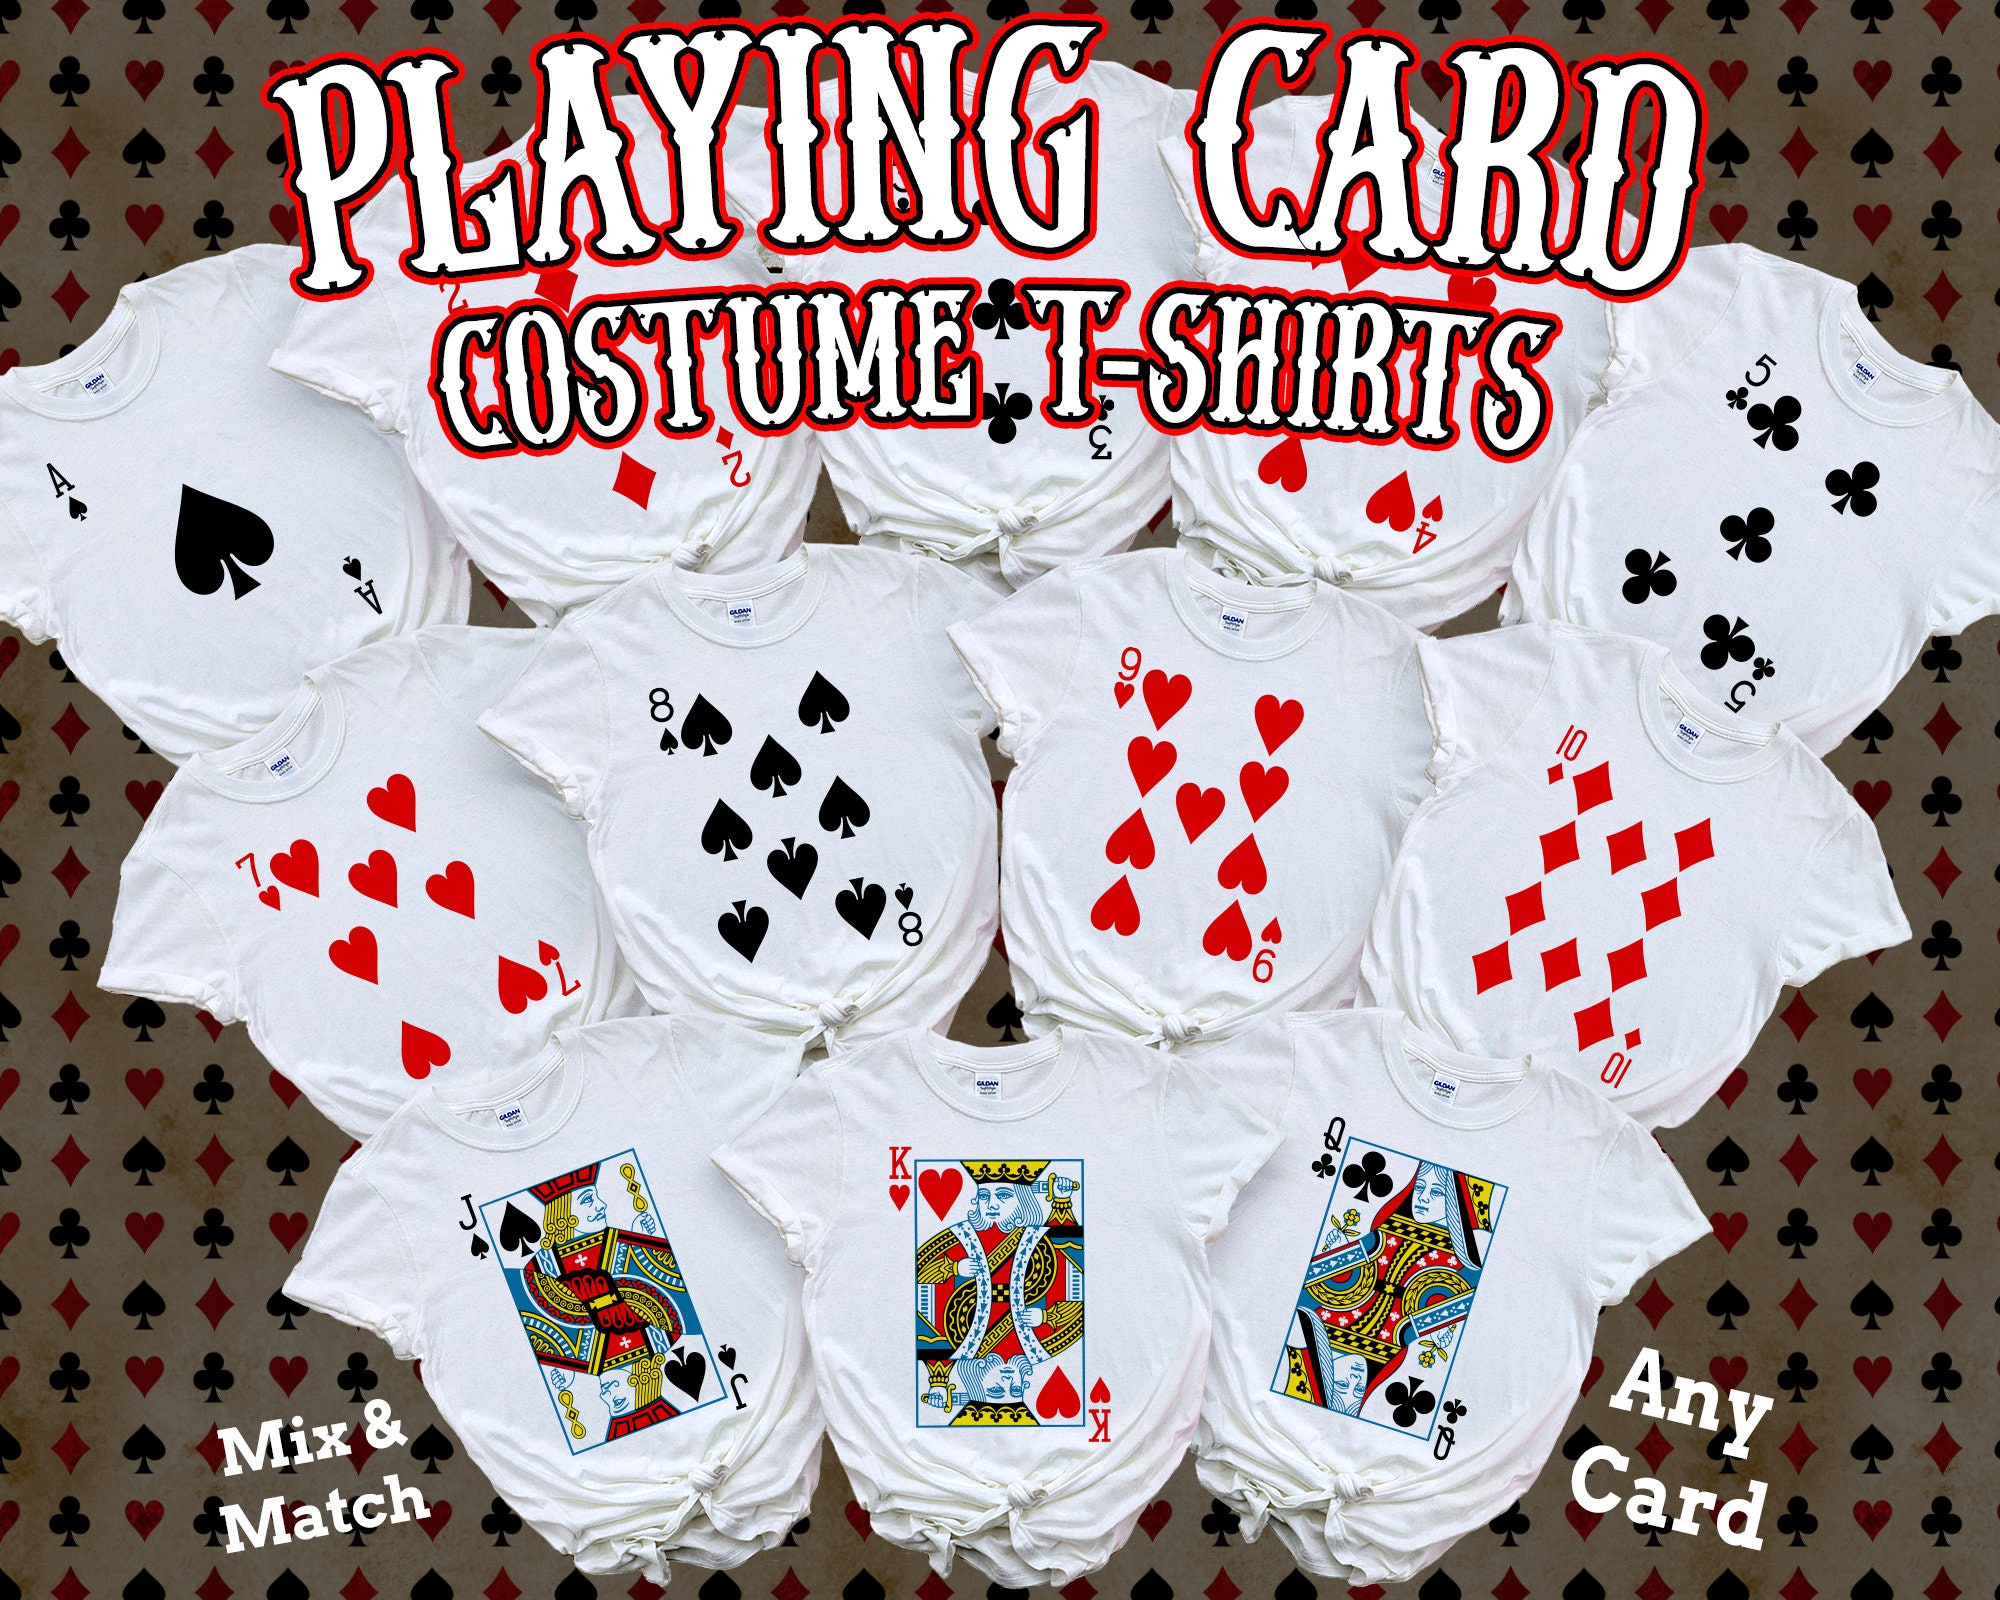 Genuine Casino Cards - Played Decks - from Assorted Nevada Casino's (Pack of 8)